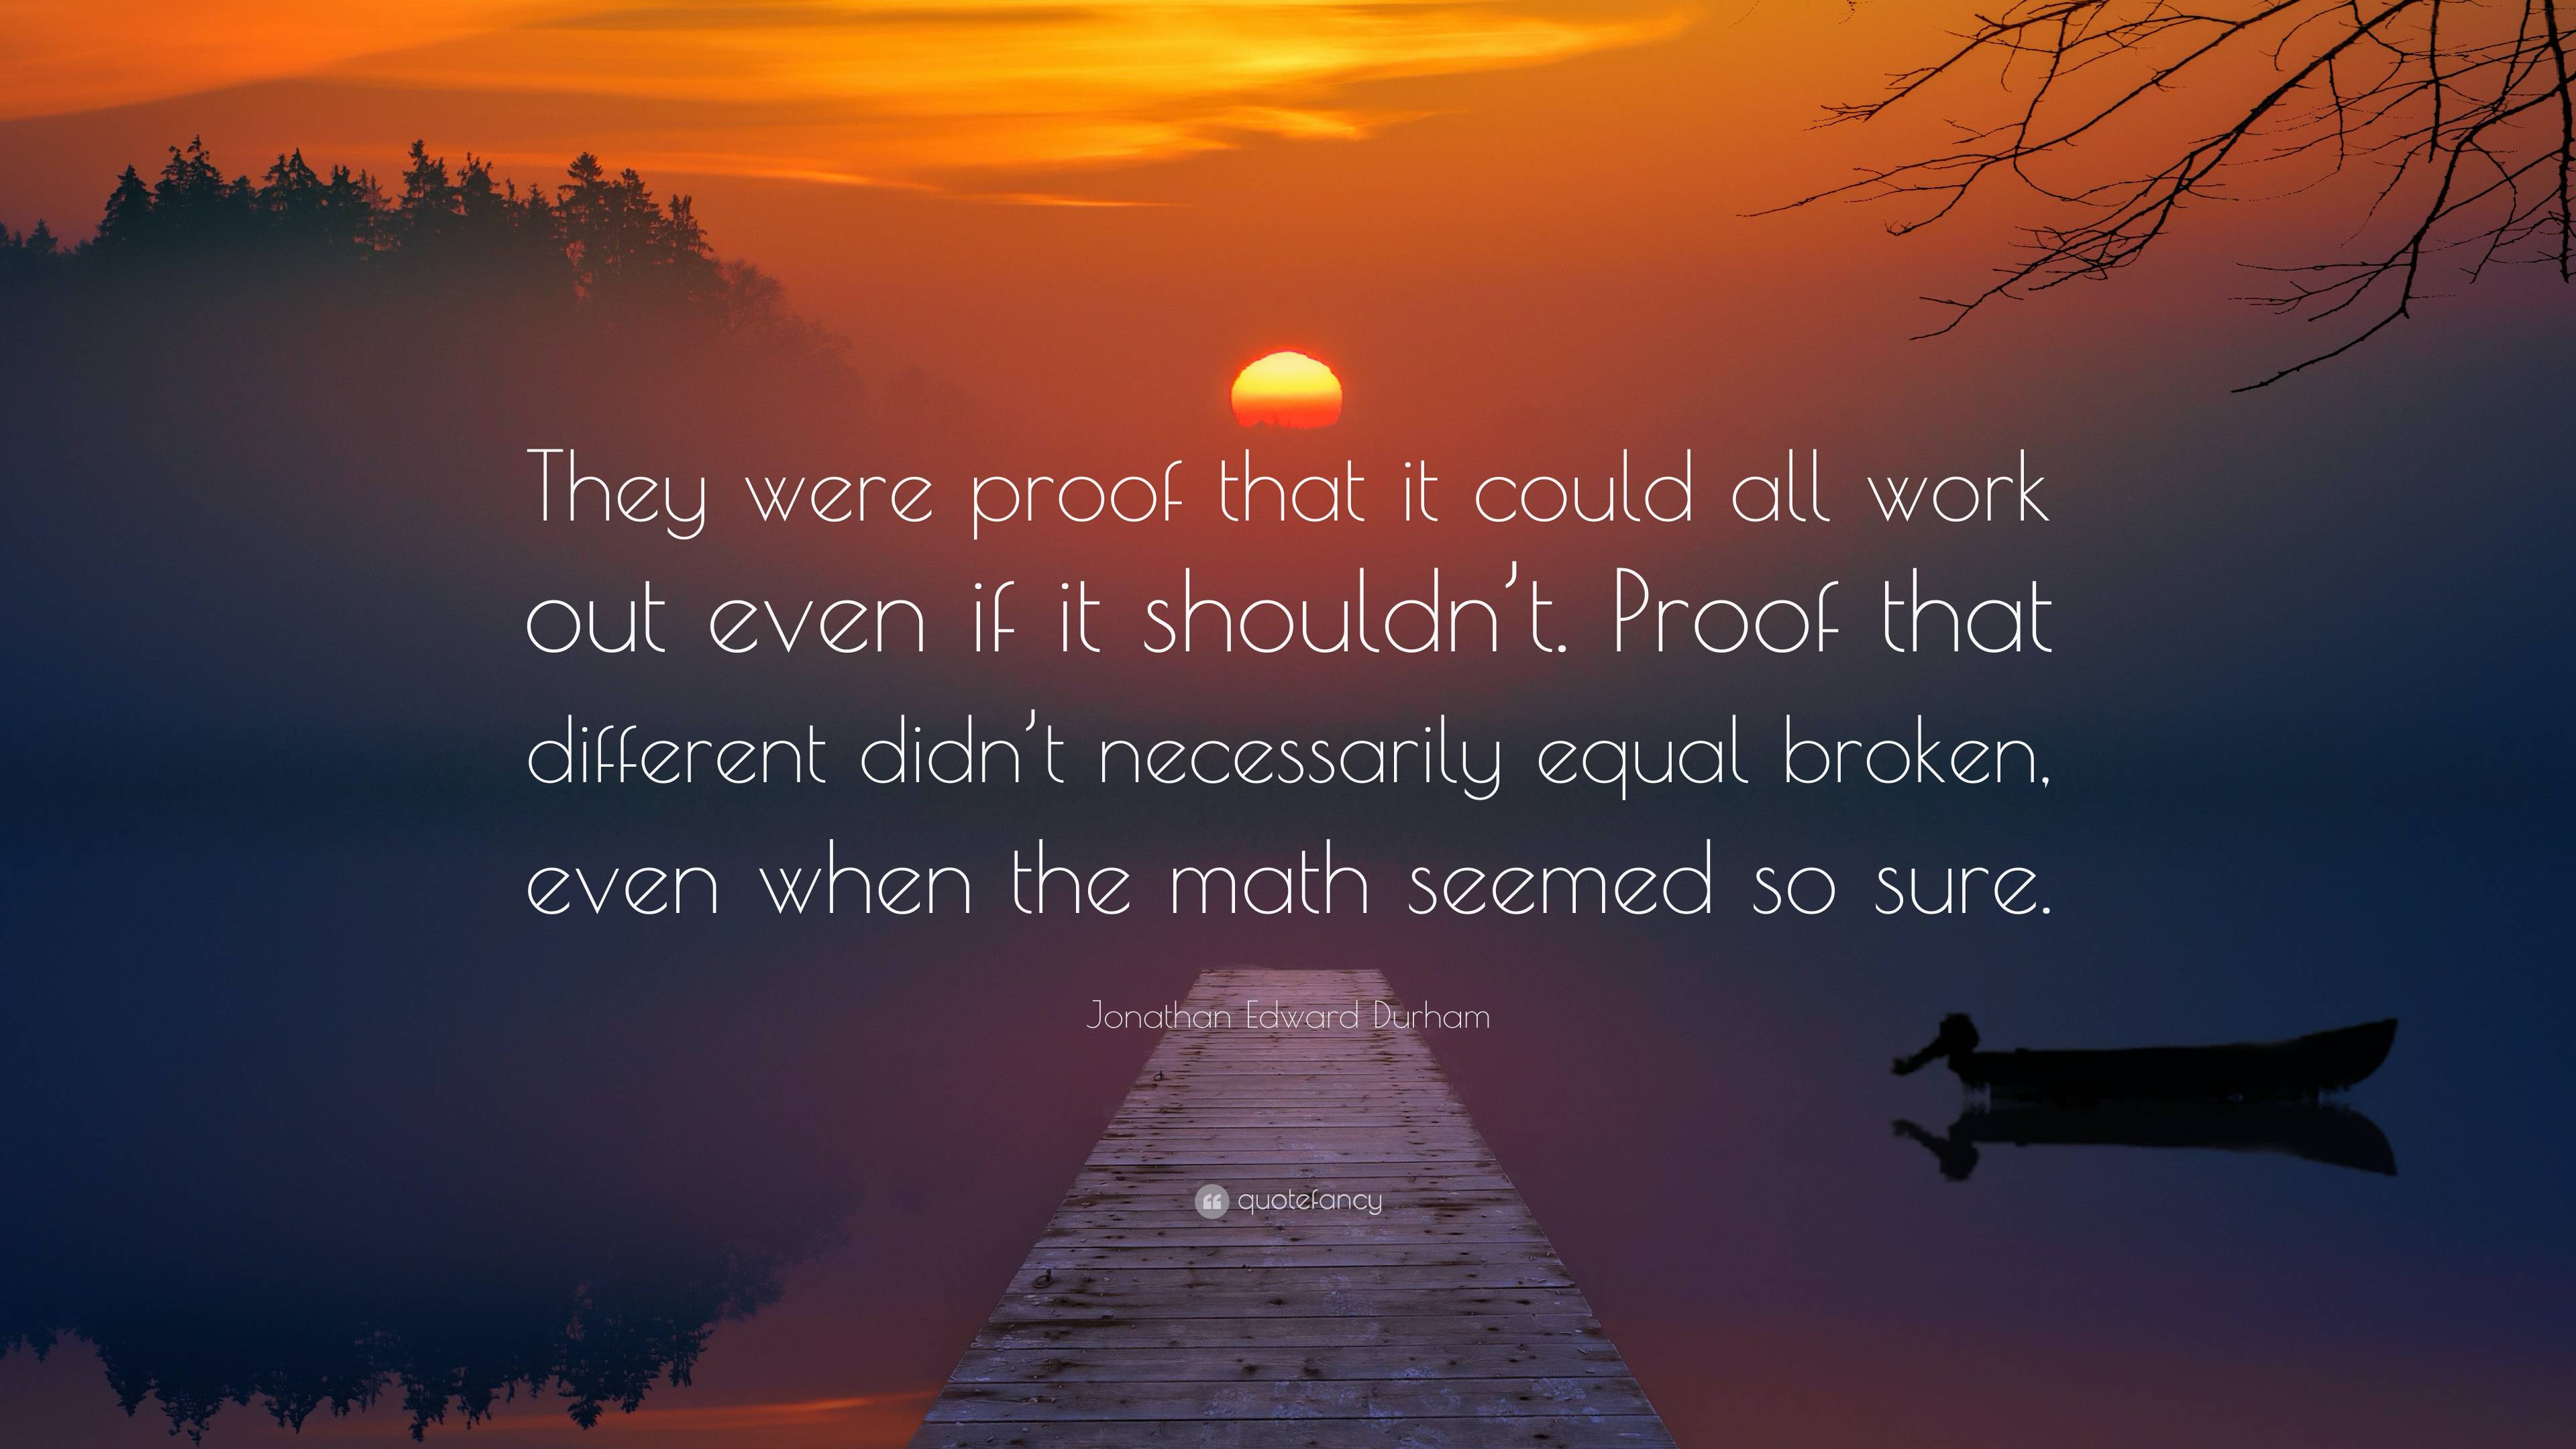 Jonathan Edward Durham Quote: “They were proof that it could all work ...